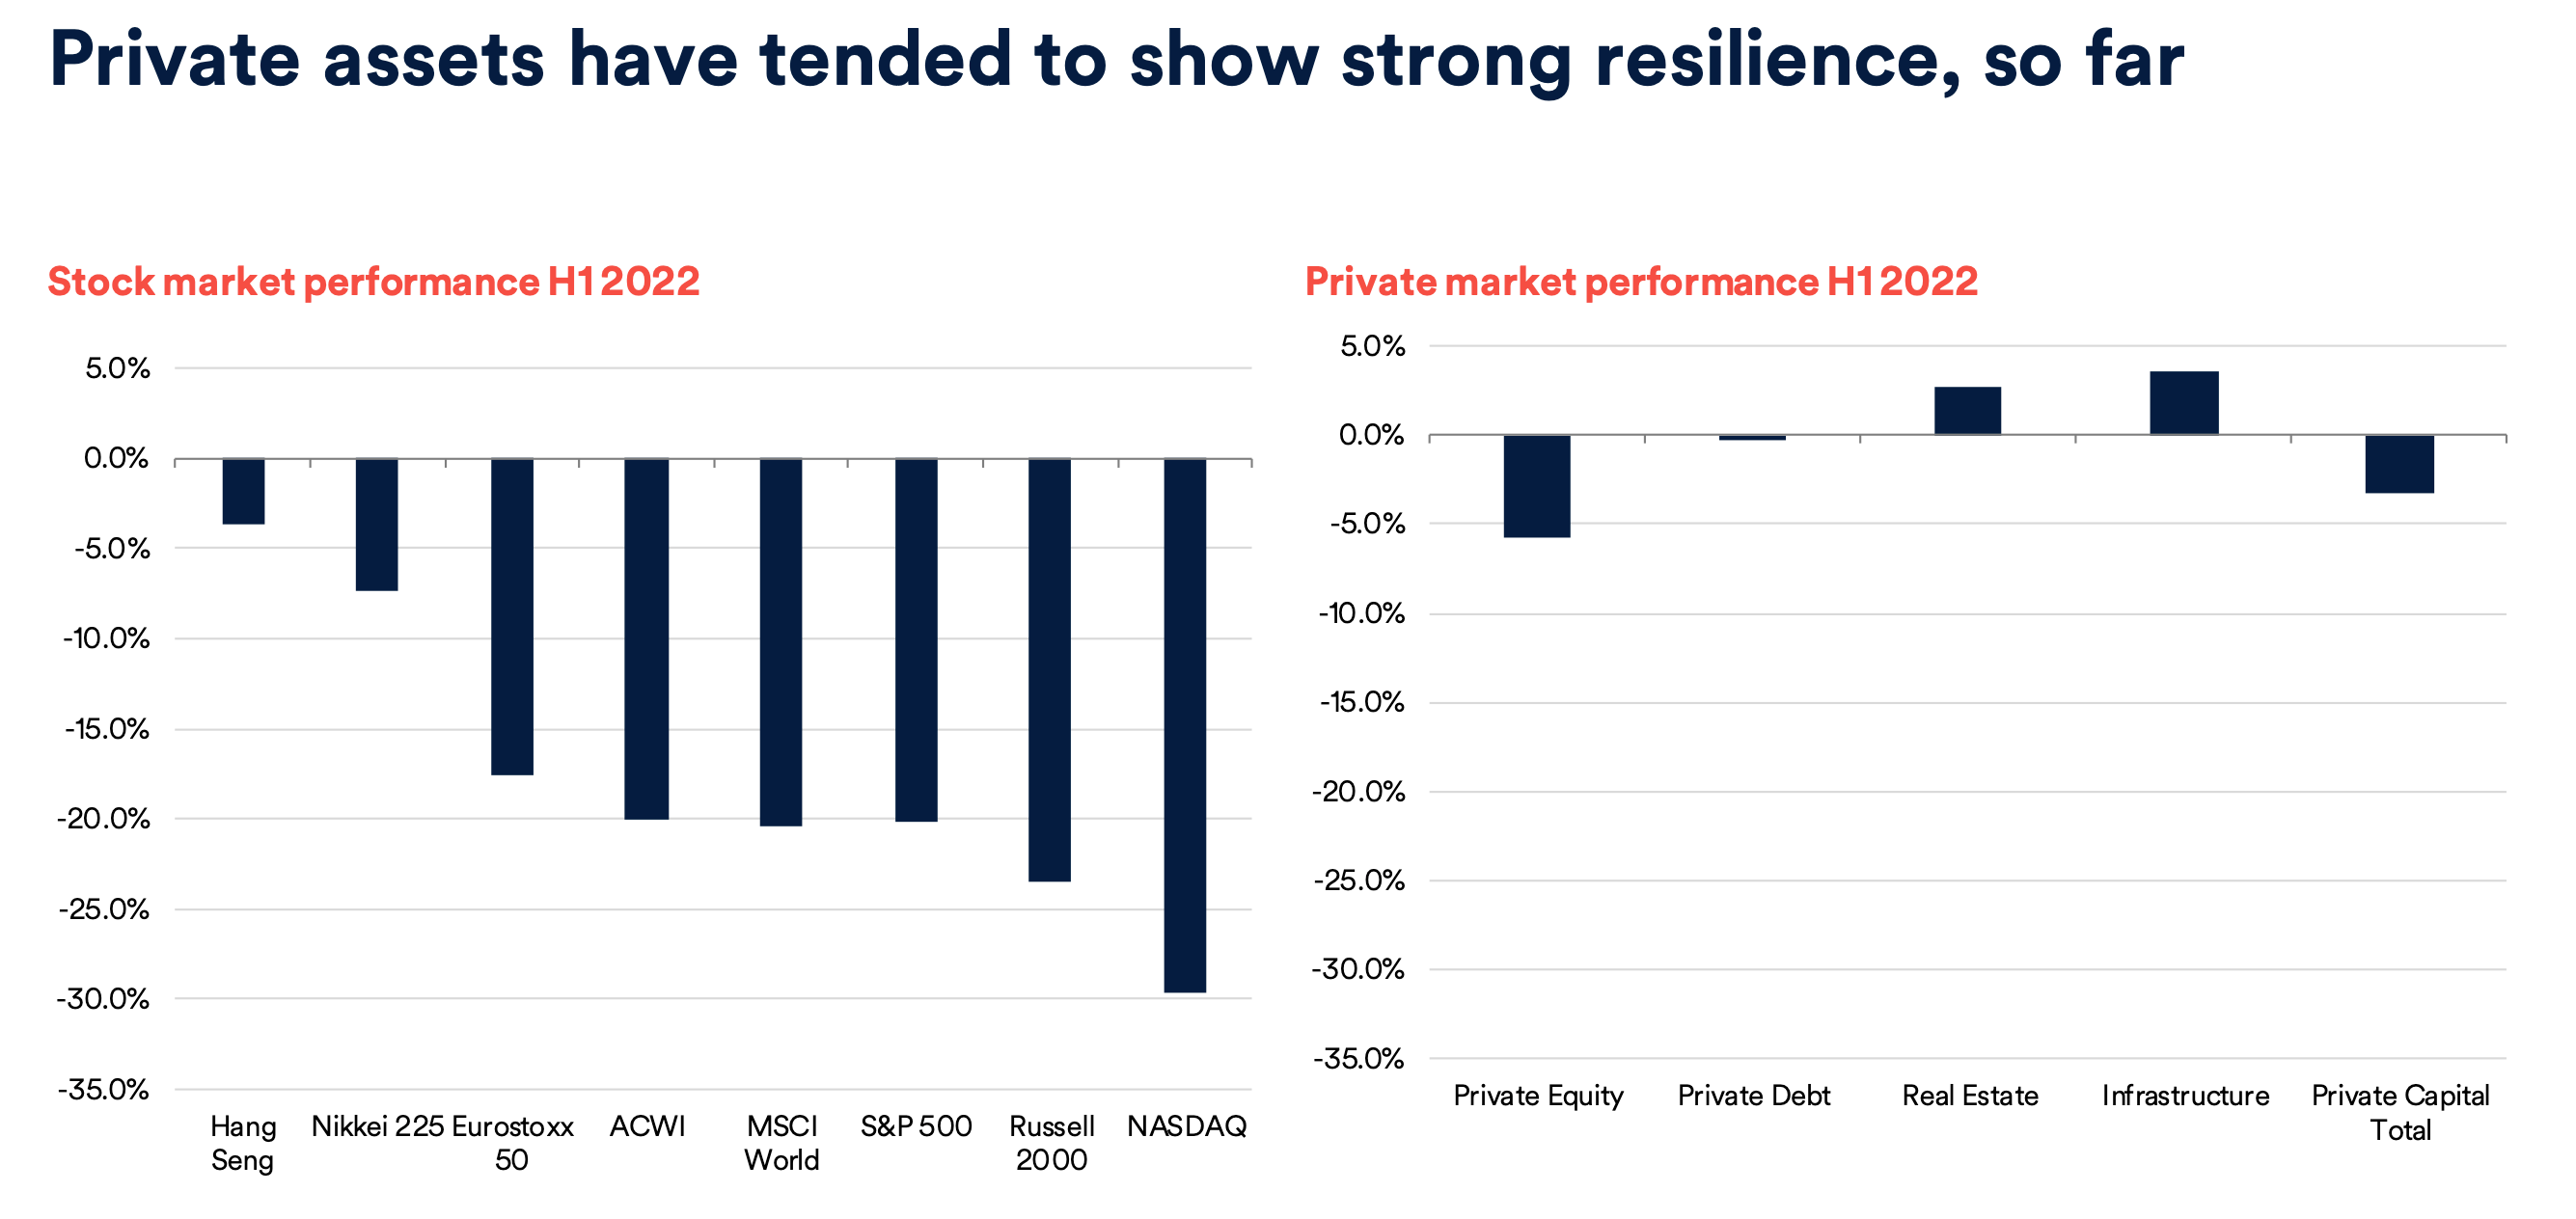 Source: Refinitiv, Burgiss, Schroders Capital 2022. Past performance is not a guide to future performance and may not be repeated. Data as of 30 June 2022.